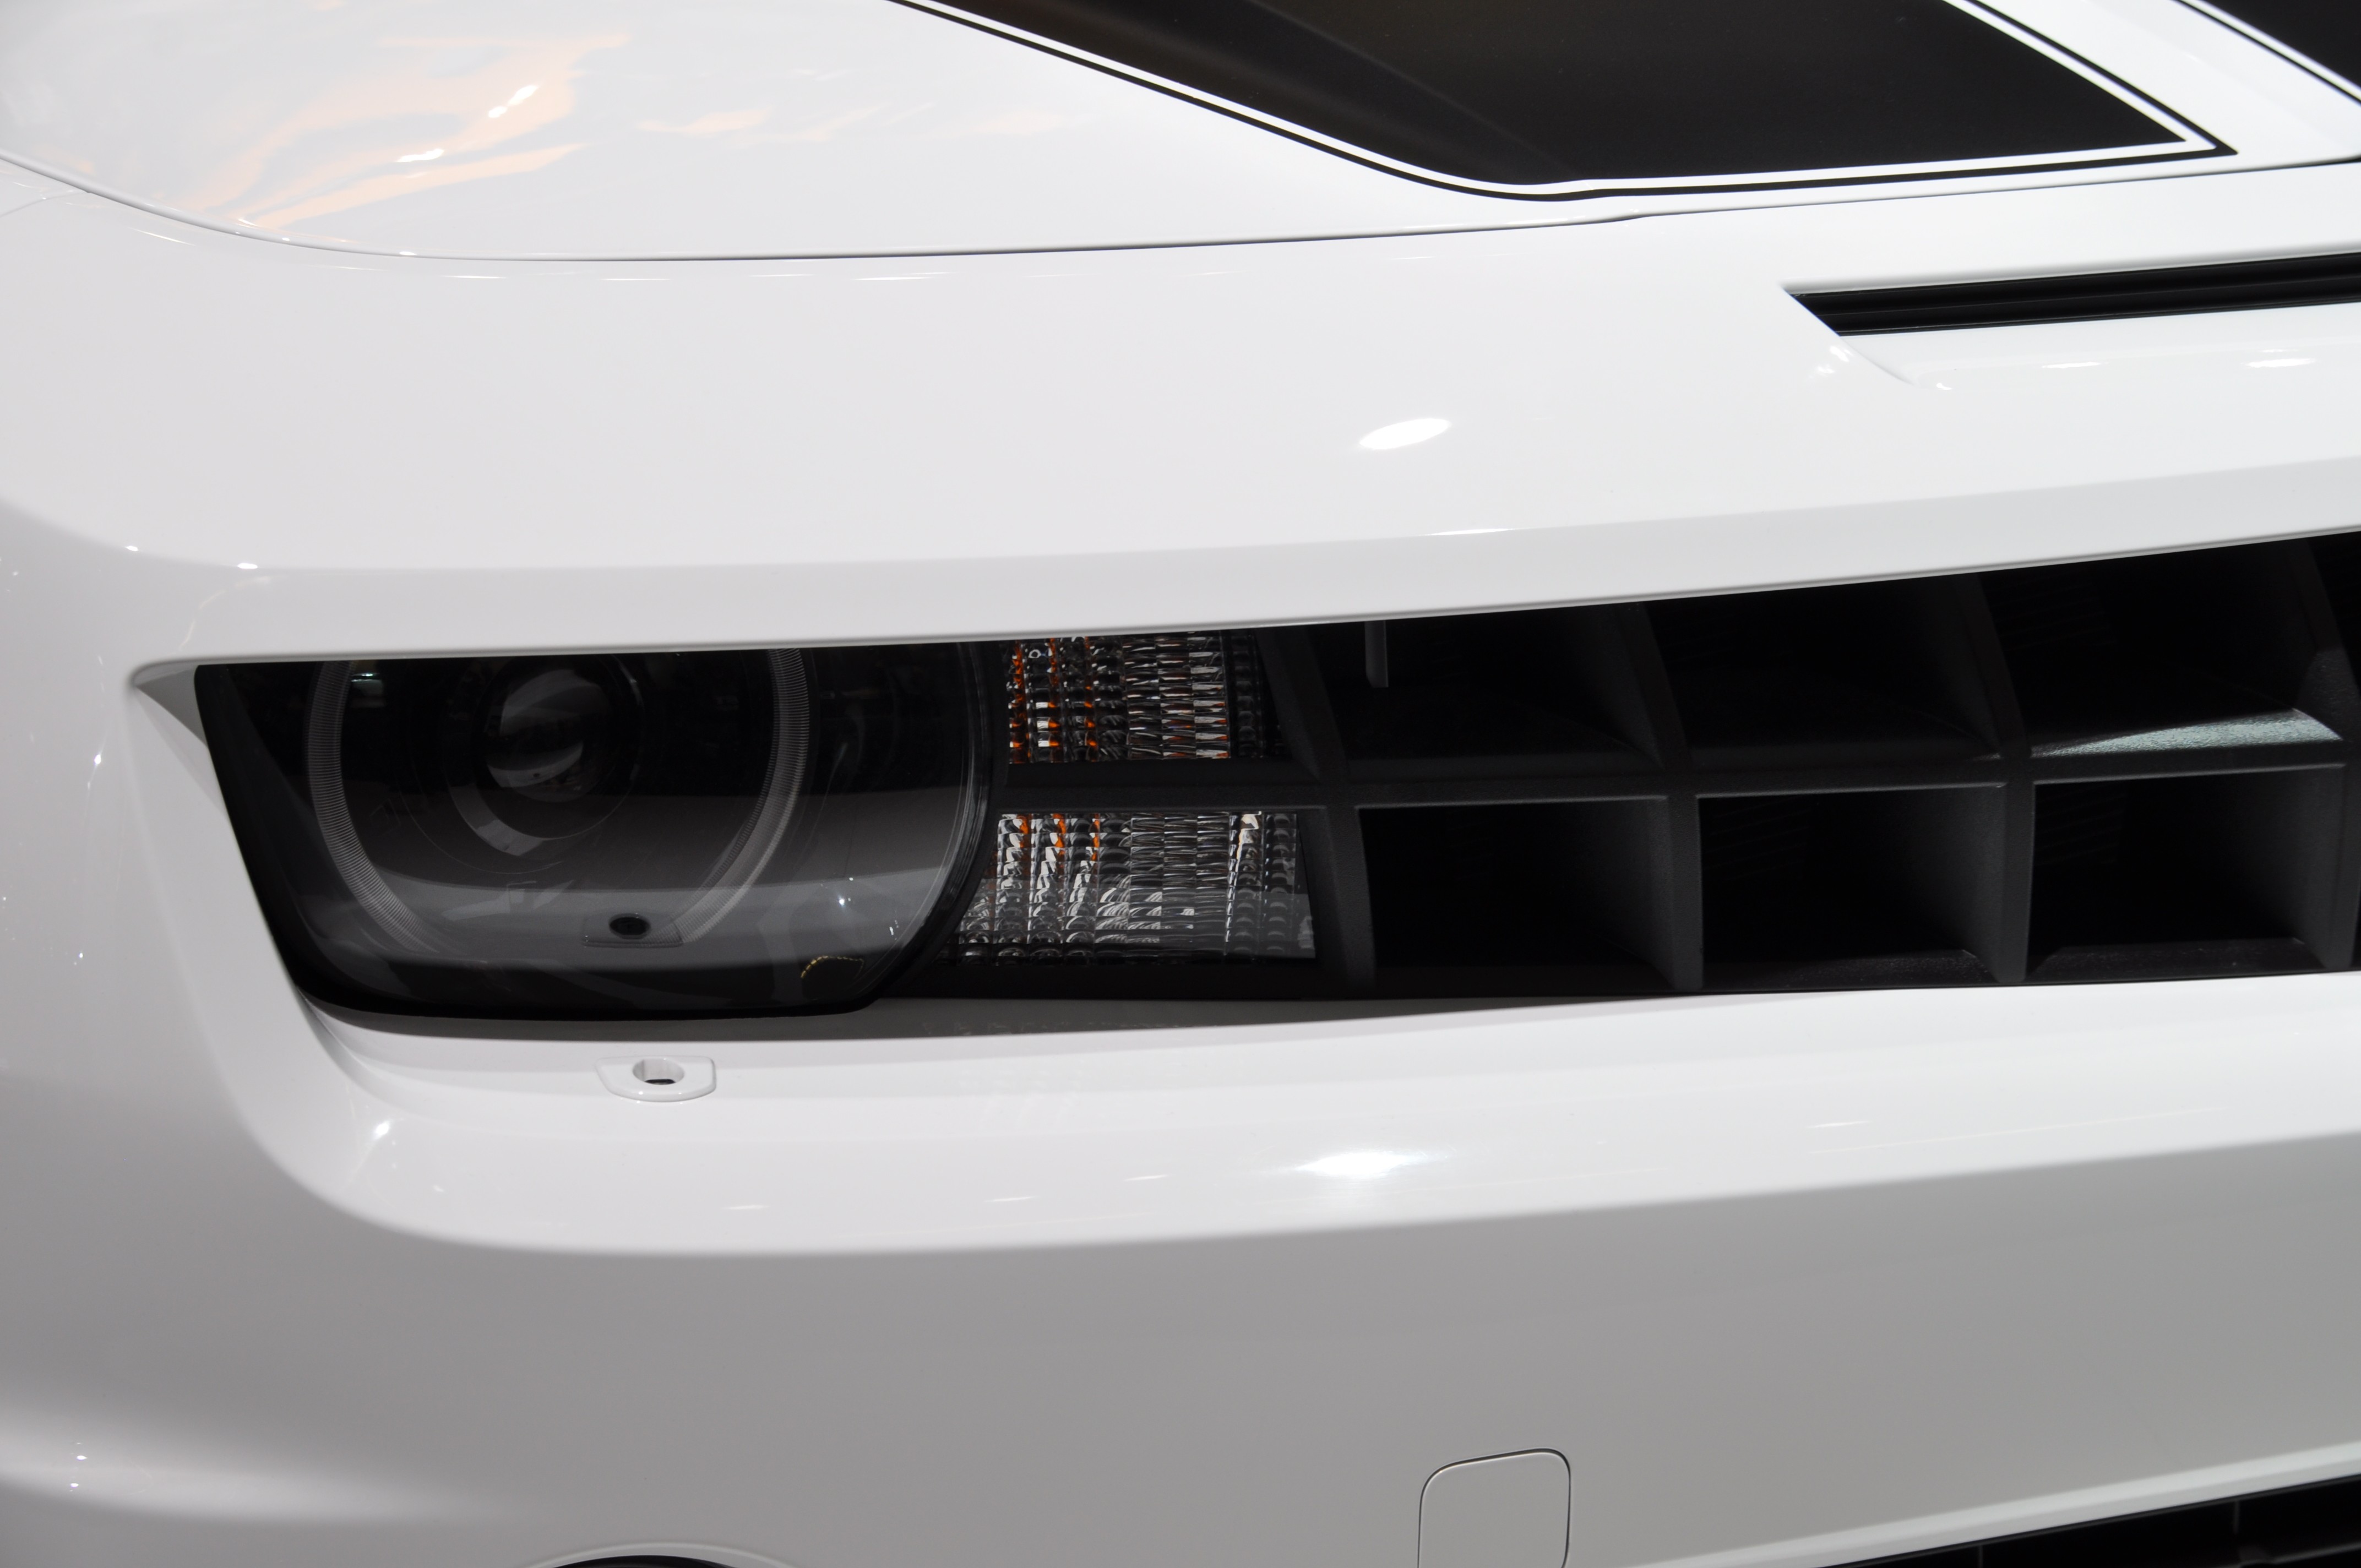 General 4288x2848 Chevrolet Camaro car white cars vehicle Chevrolet muscle cars American cars